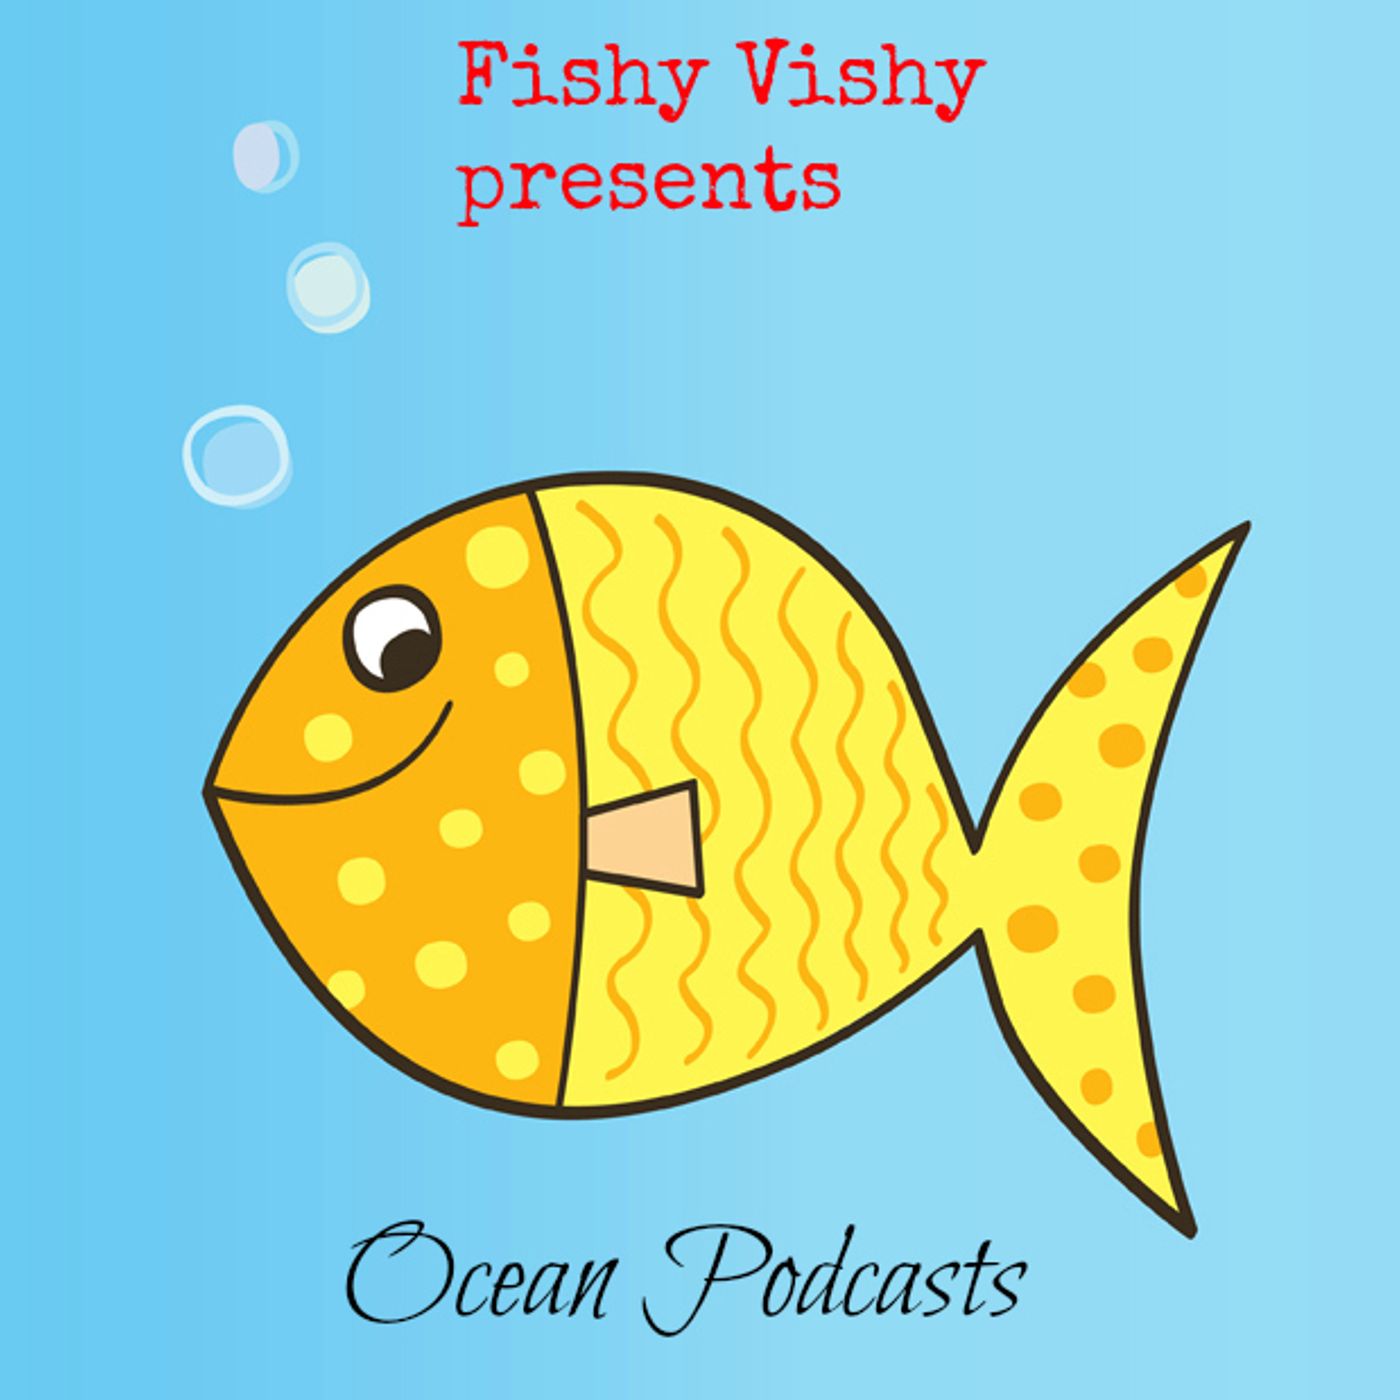 Ocean Podcasts